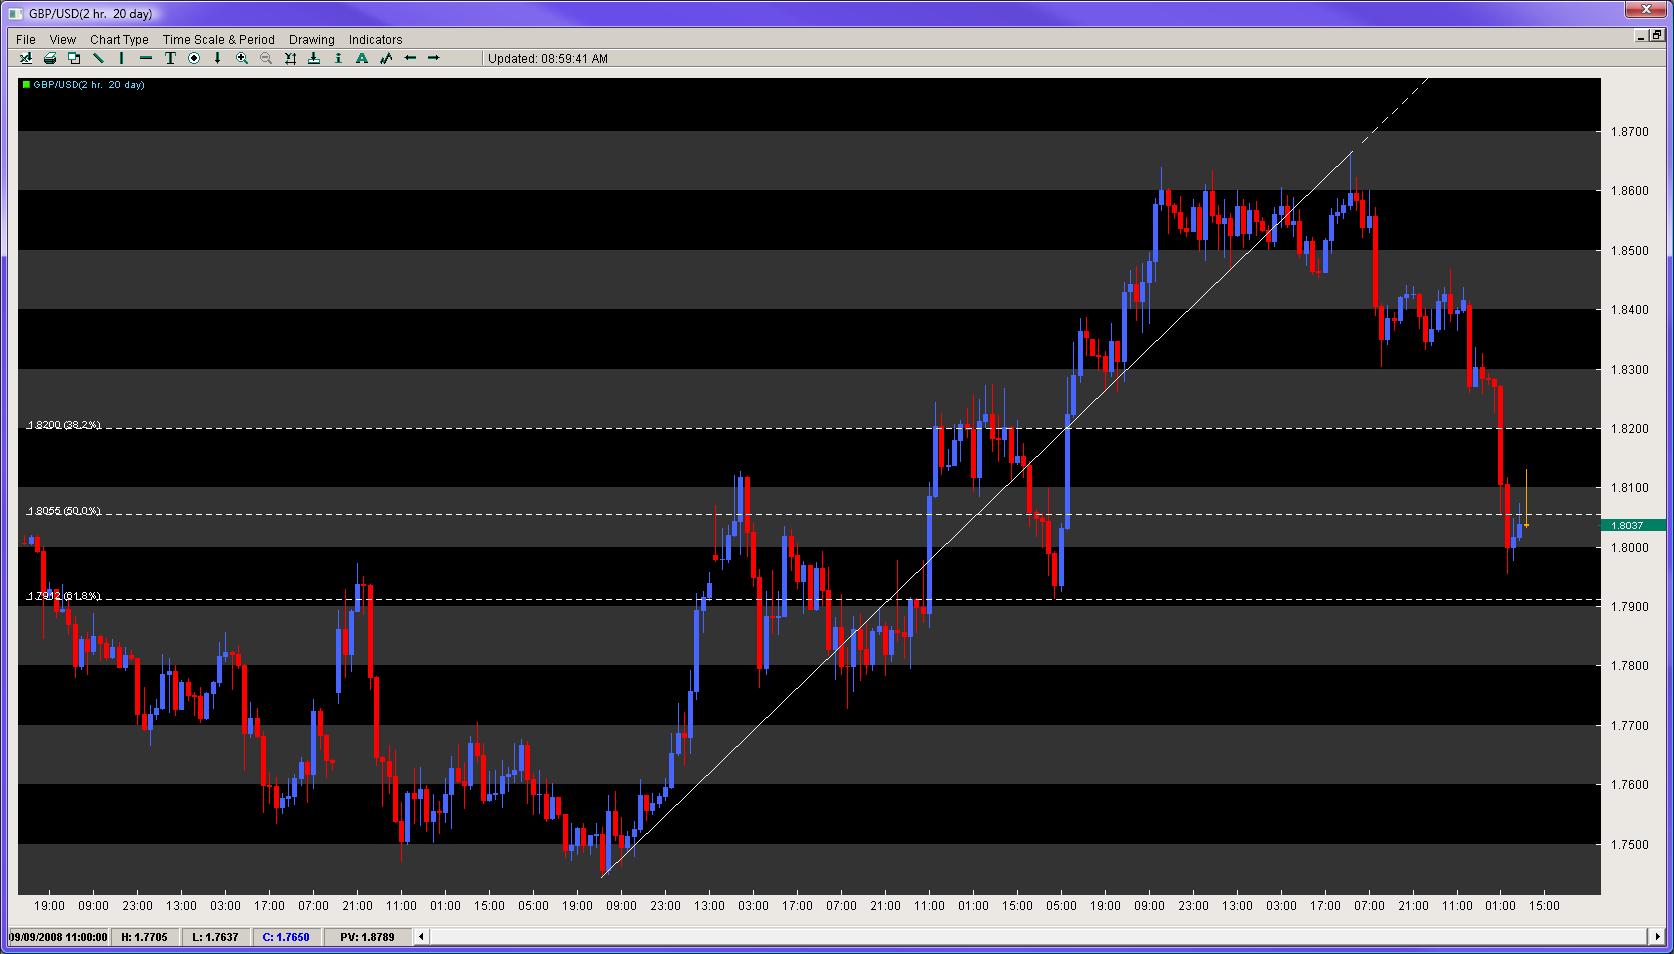 GBP/USD Intraday Chart